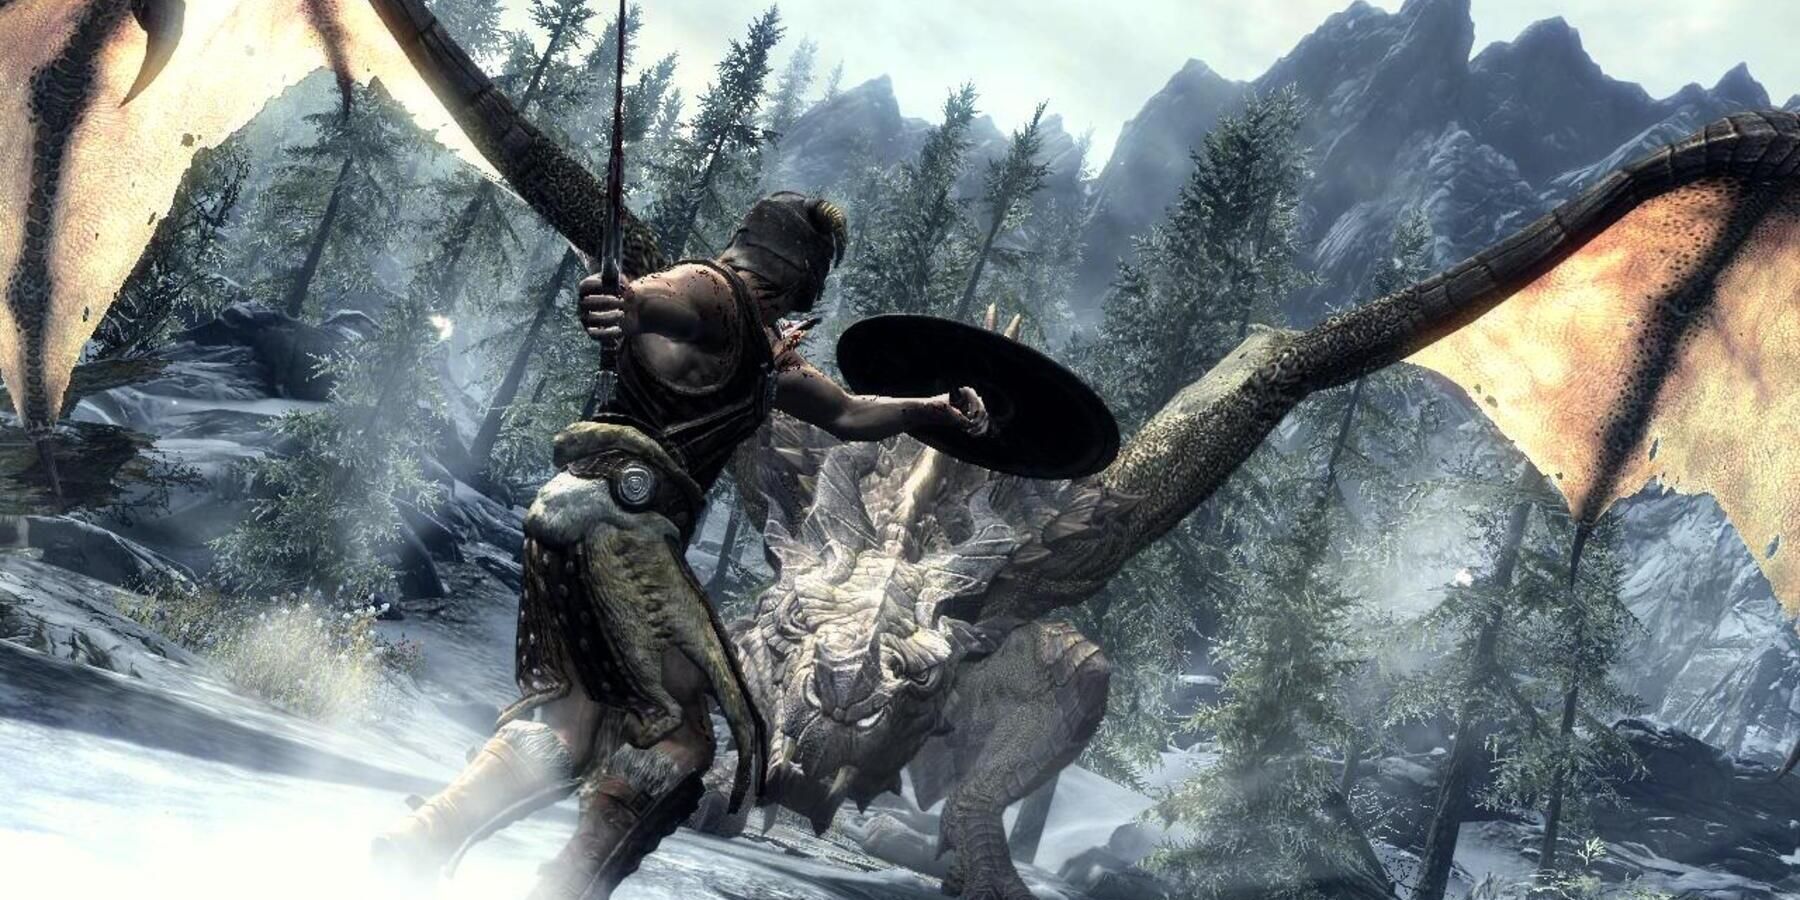 skyrim character with sword and shield fighting against a dragon